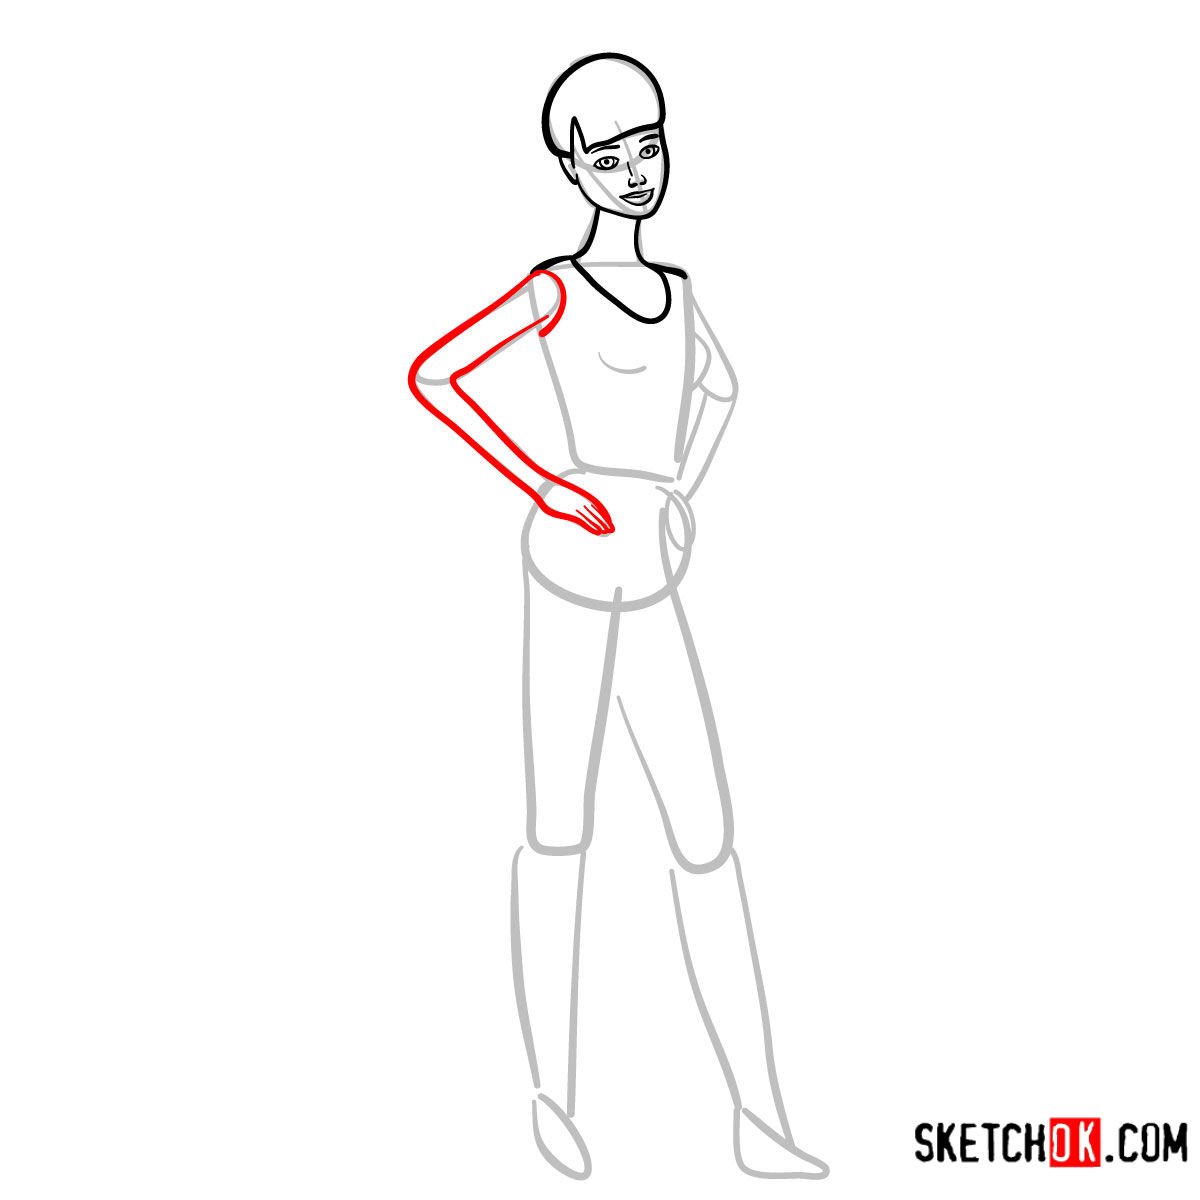 How to draw Barbie from Toy Story - step 06